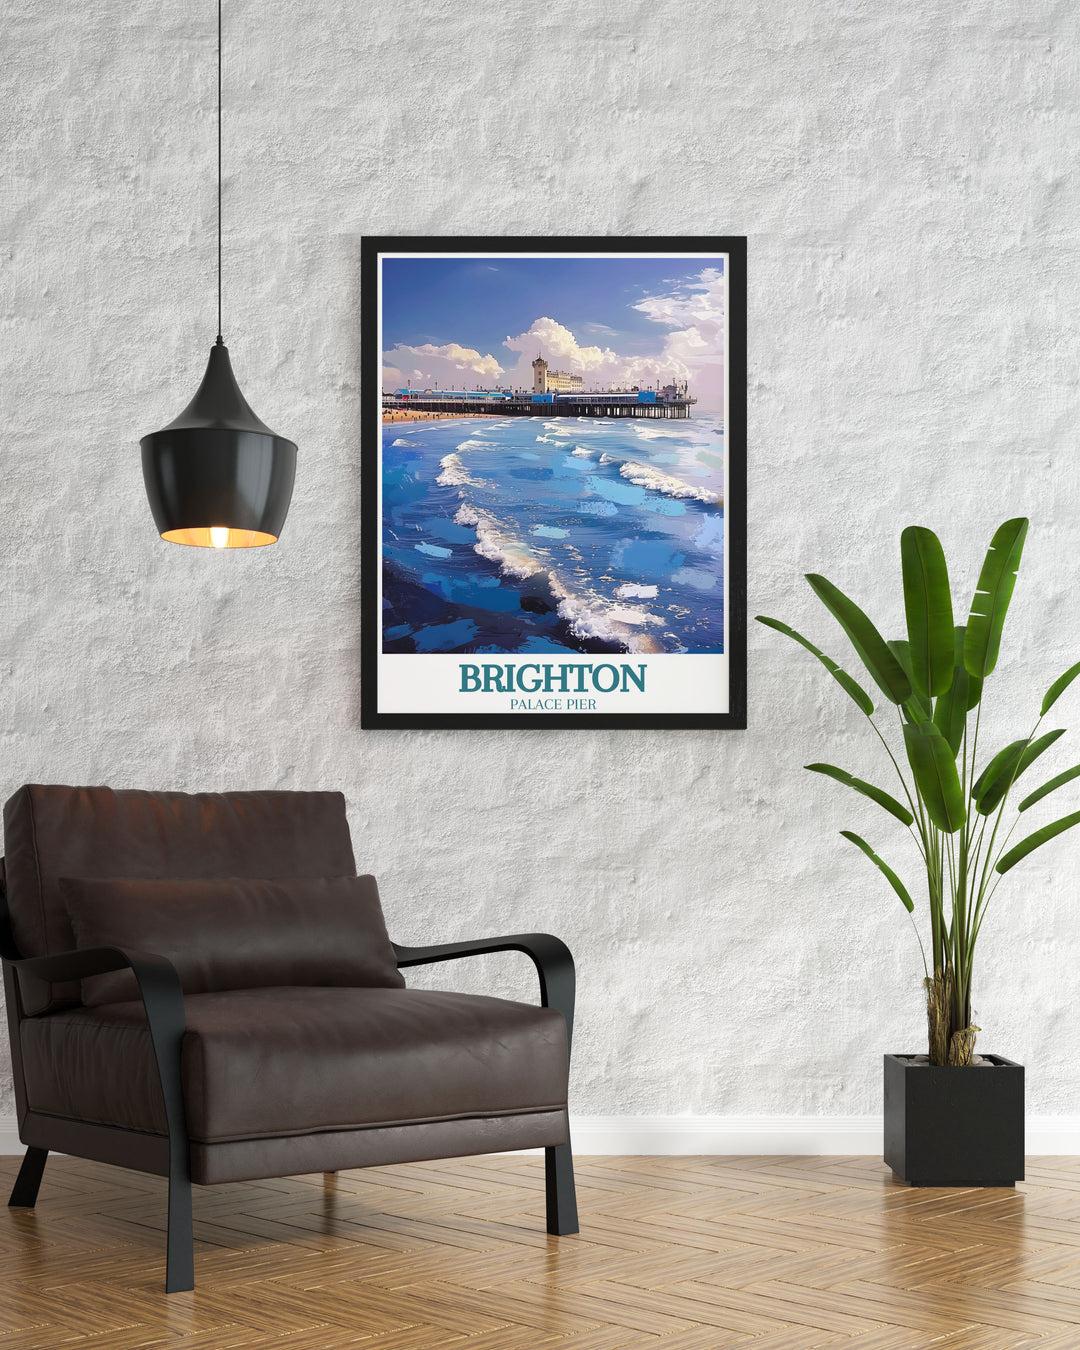 Retro travel poster of Brighton Pier with the stunning English Channel a beautiful addition to your home decor that captures the essence of Brighton England and its vibrant coastal charm.